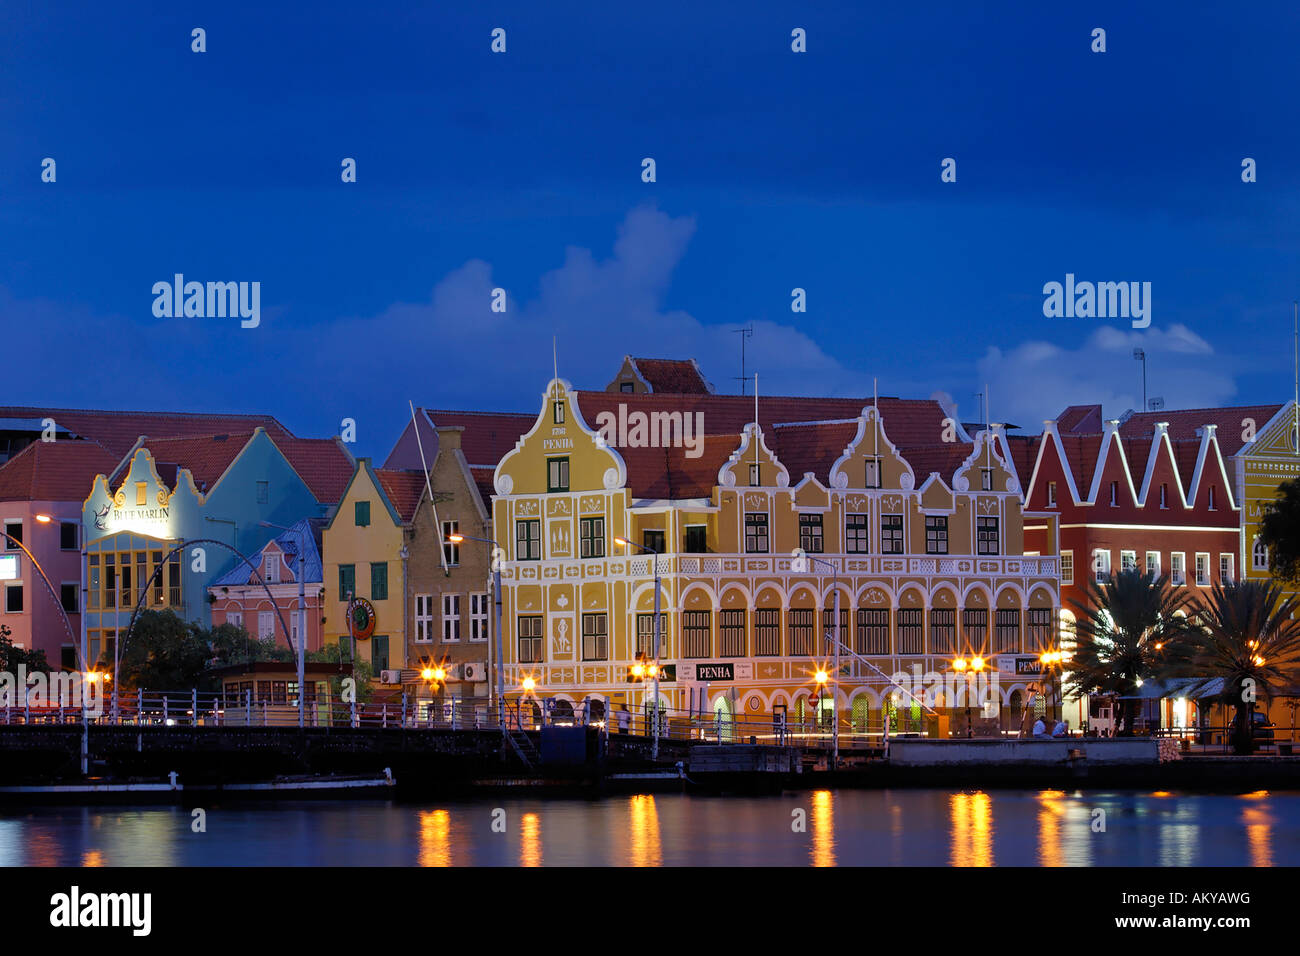 Evening in Willemstad, capital of Curacao and the Netherlands Antilles Stock Photo